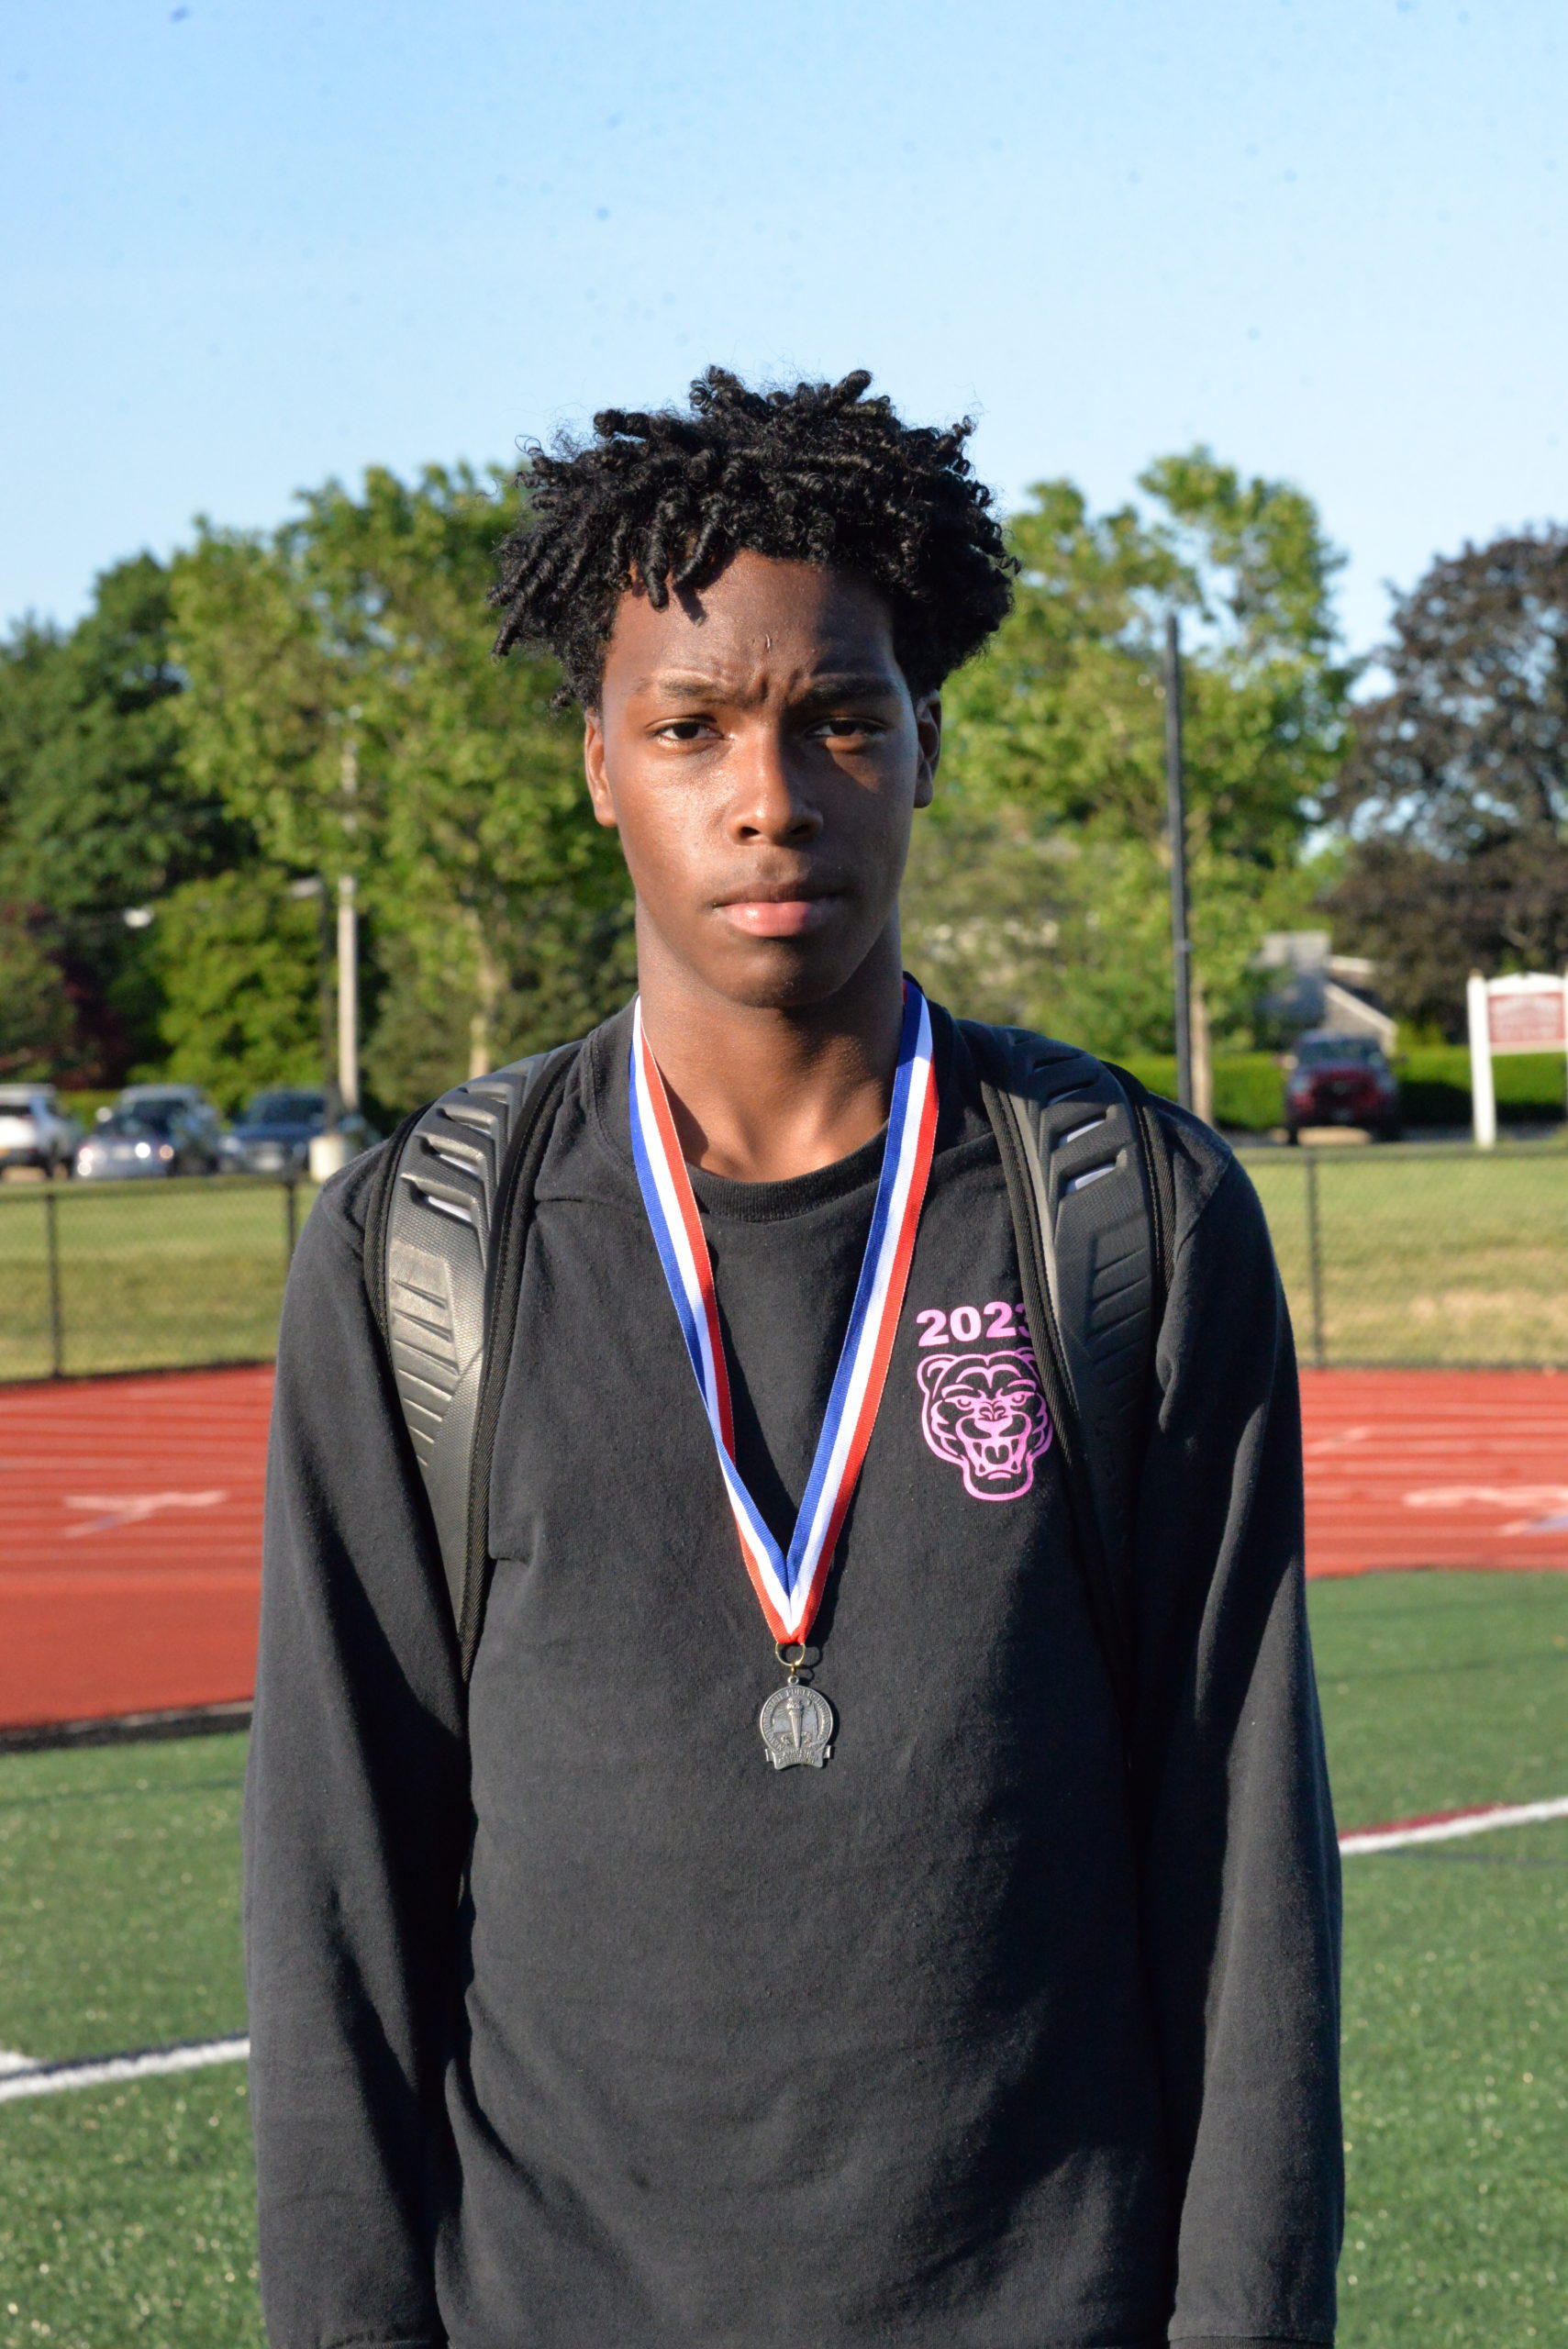 Southampton's Derek Reed placed second in the Division IV high jump.